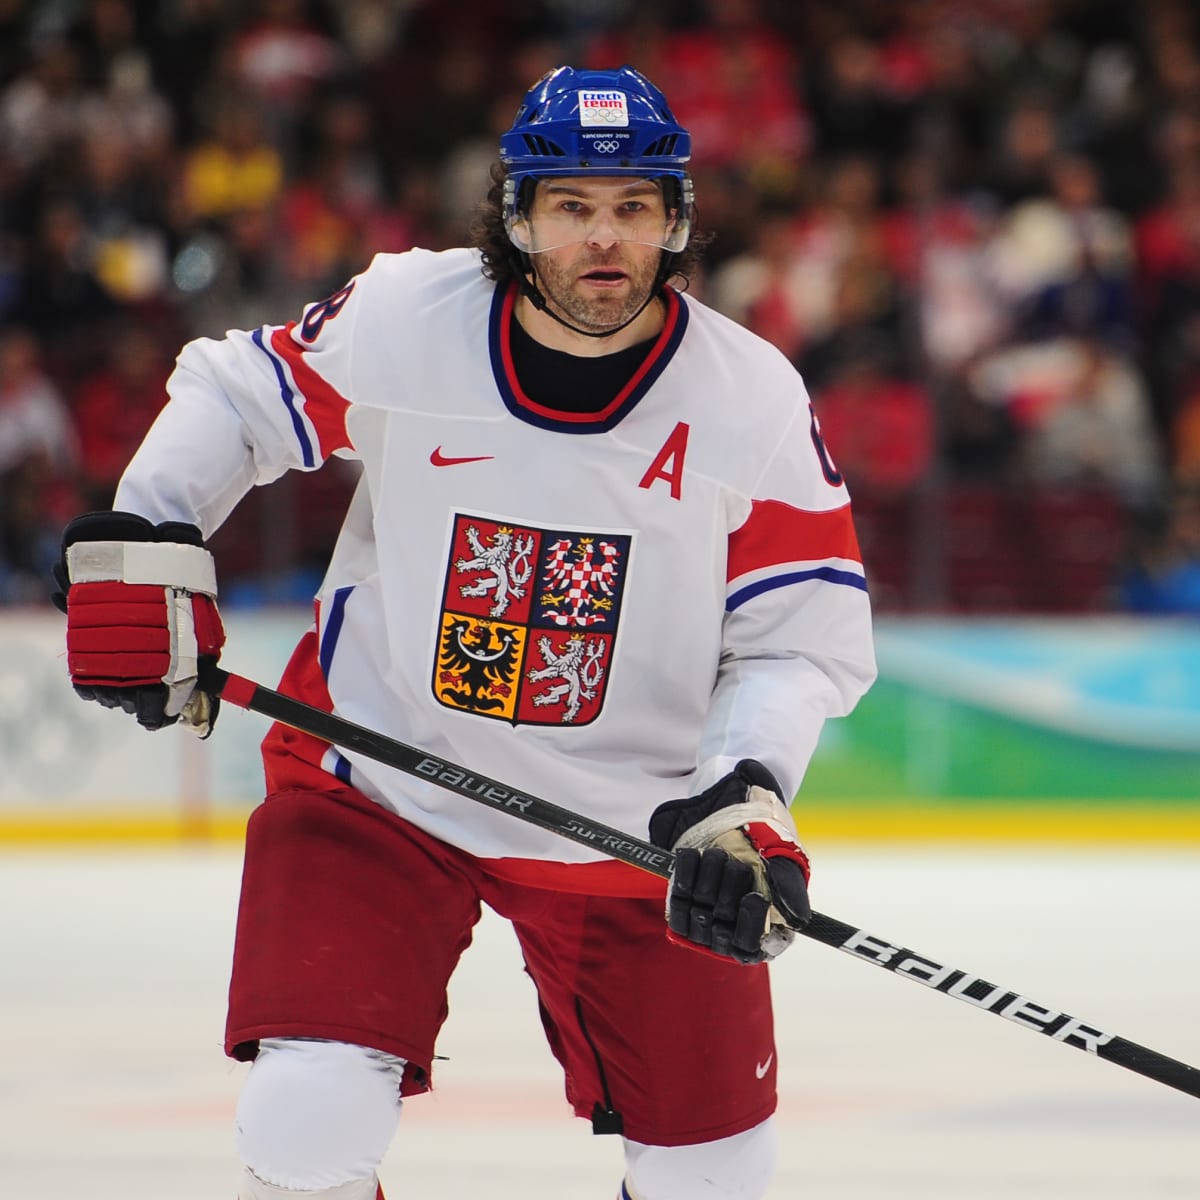 jaromir jagr: how I'll tame you today, you plain of ice